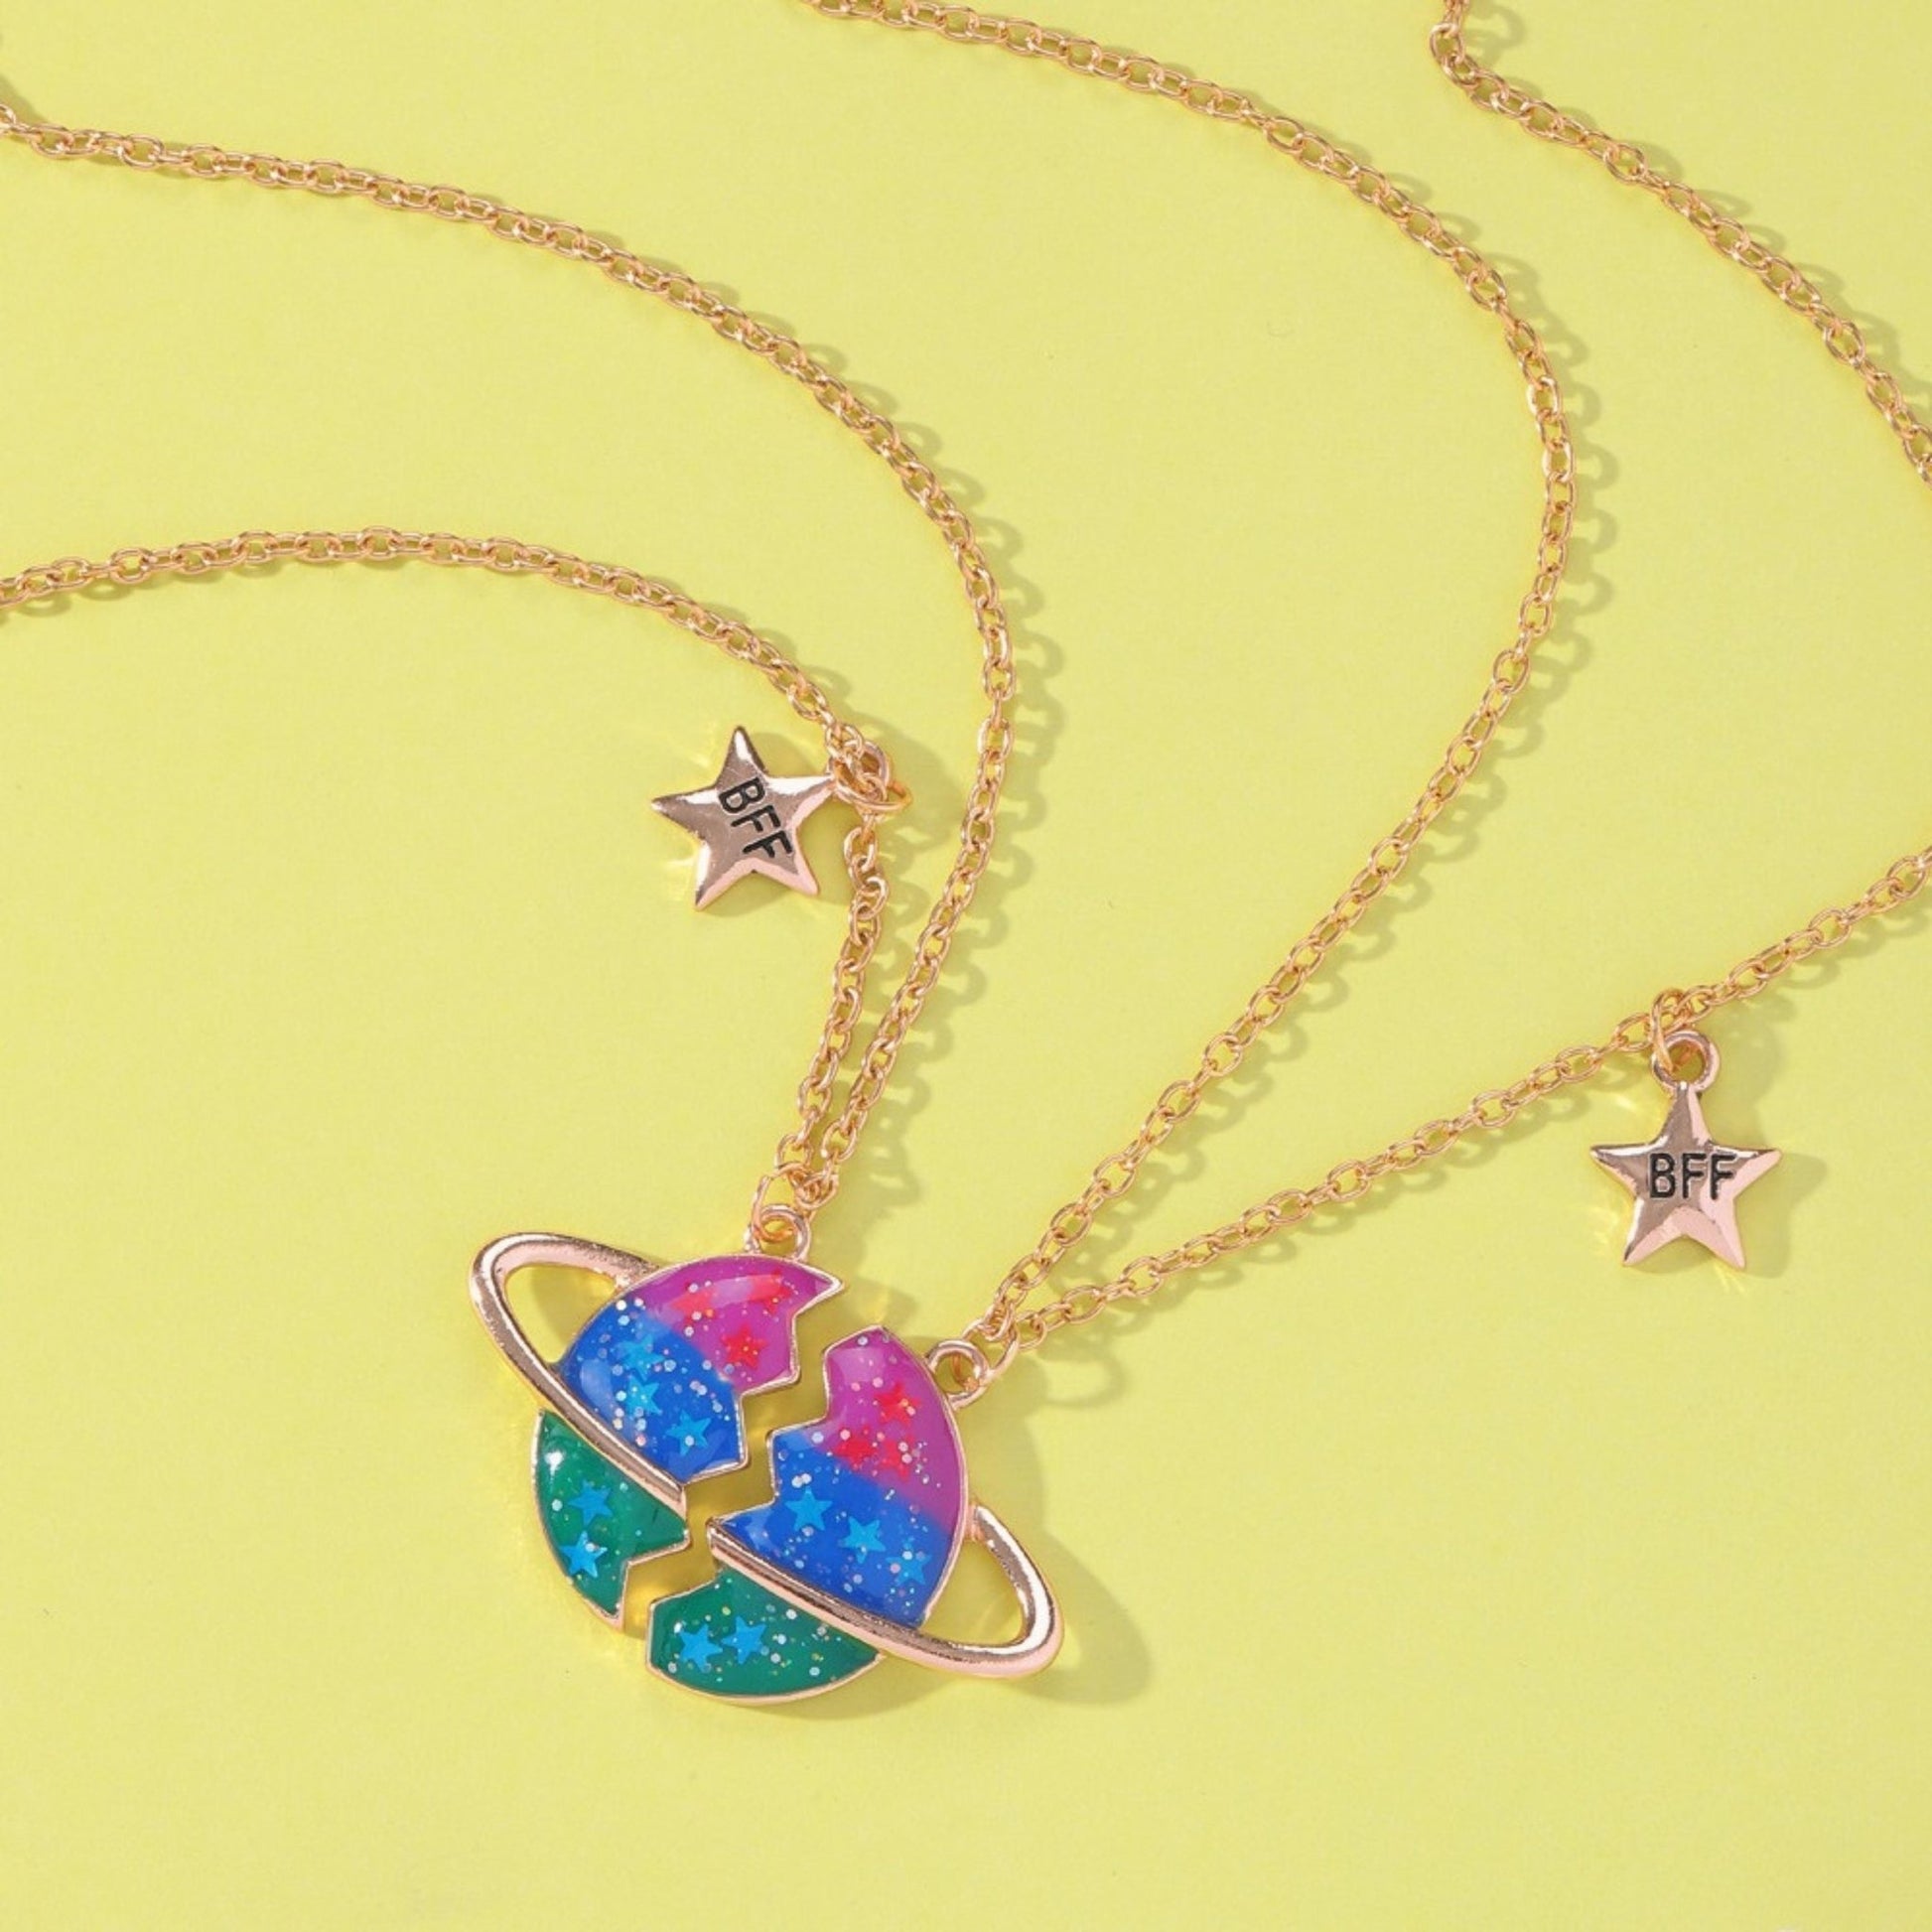 BFF Planet Necklace - Space Mesmerise - Space Gifts | Lamps | Statues | Home Decor